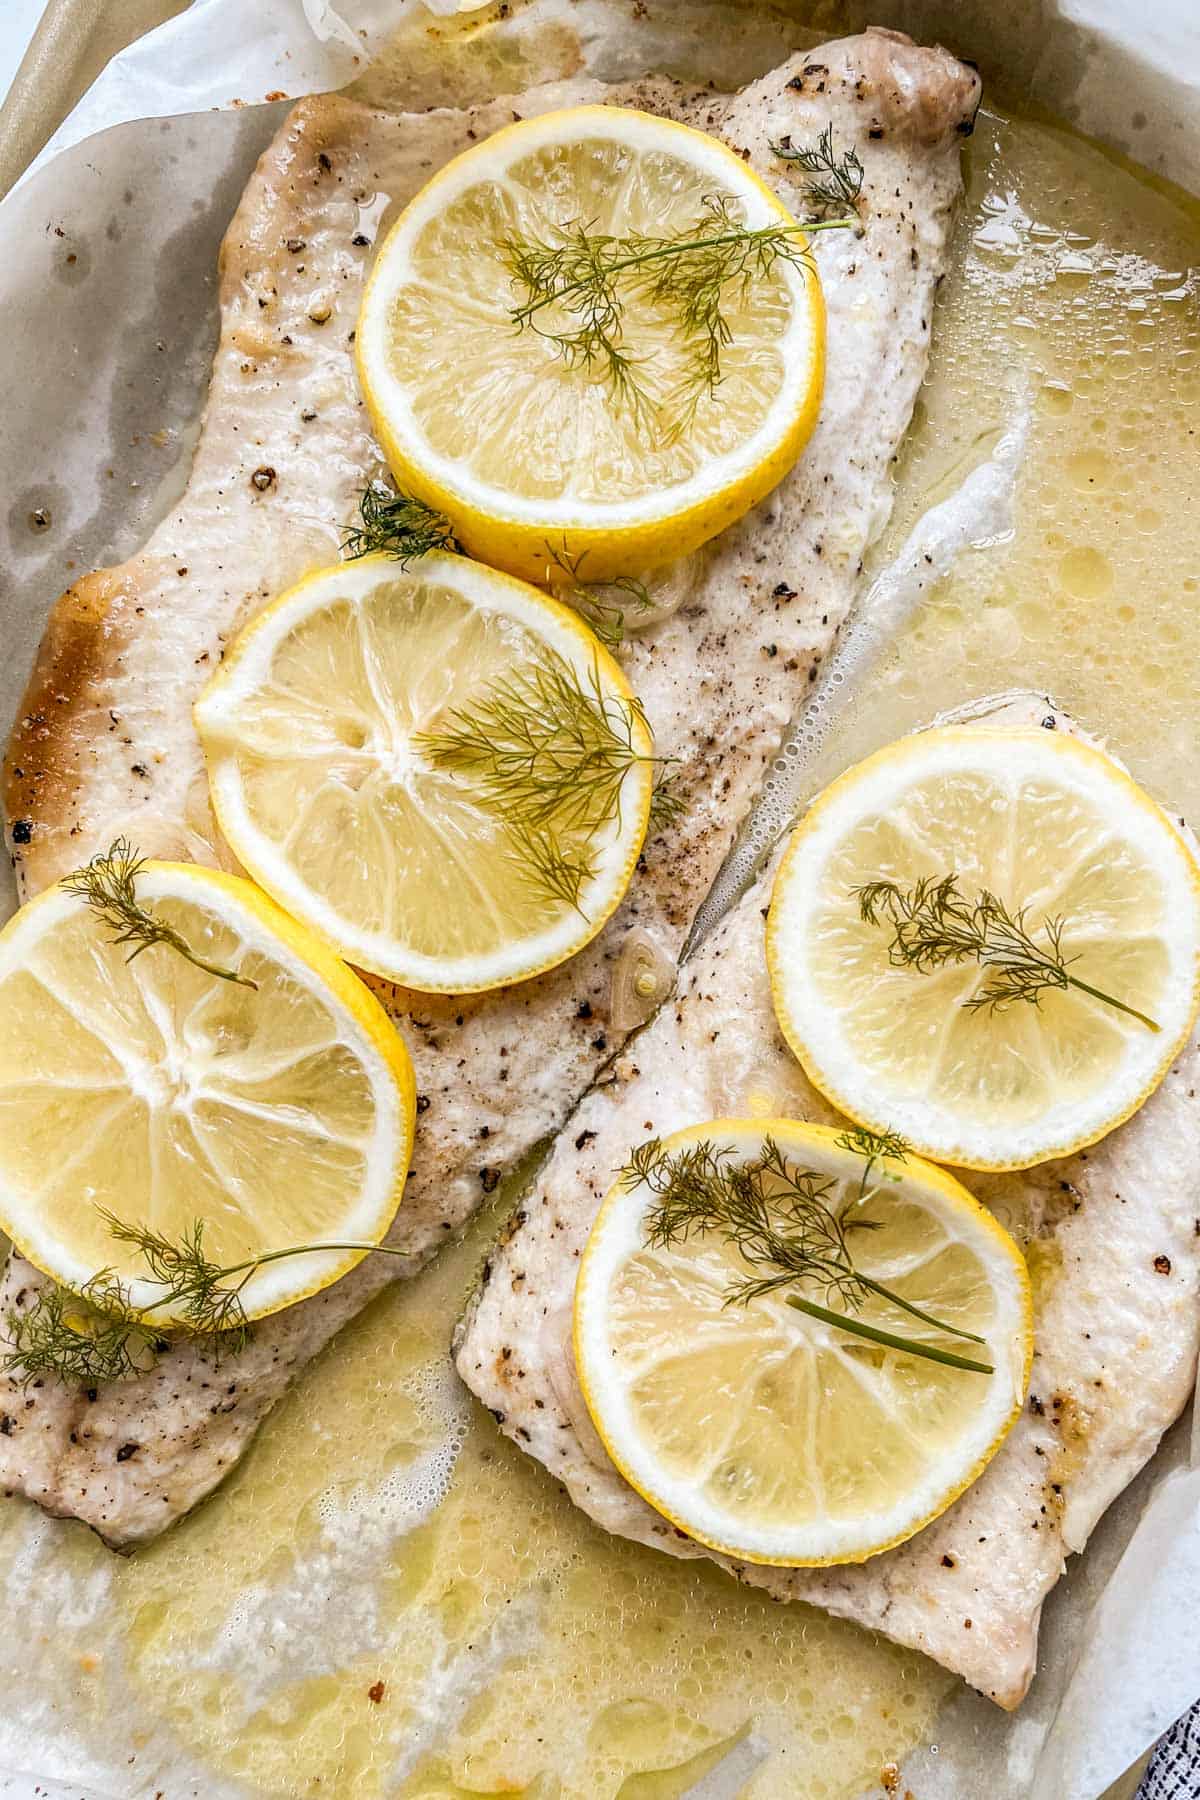 Two baked whitefish fillets topped with lemon slices and dill.